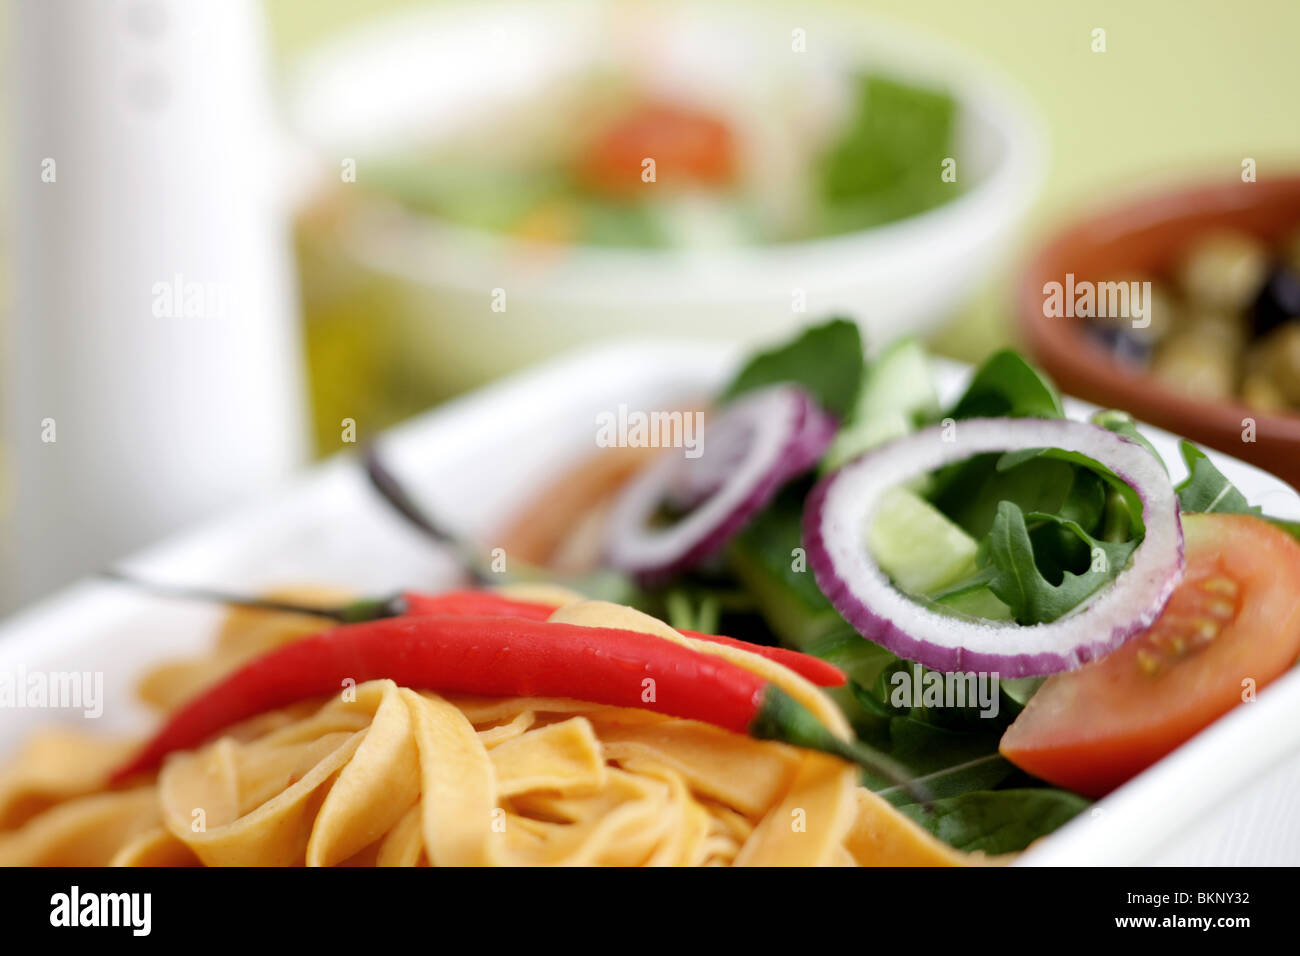 Authentic Italian Style Colourful Red Pepper and Chilli Tagliatelle Pasta Meal With A Salad And No People On A Table Top Setting Stock Photo